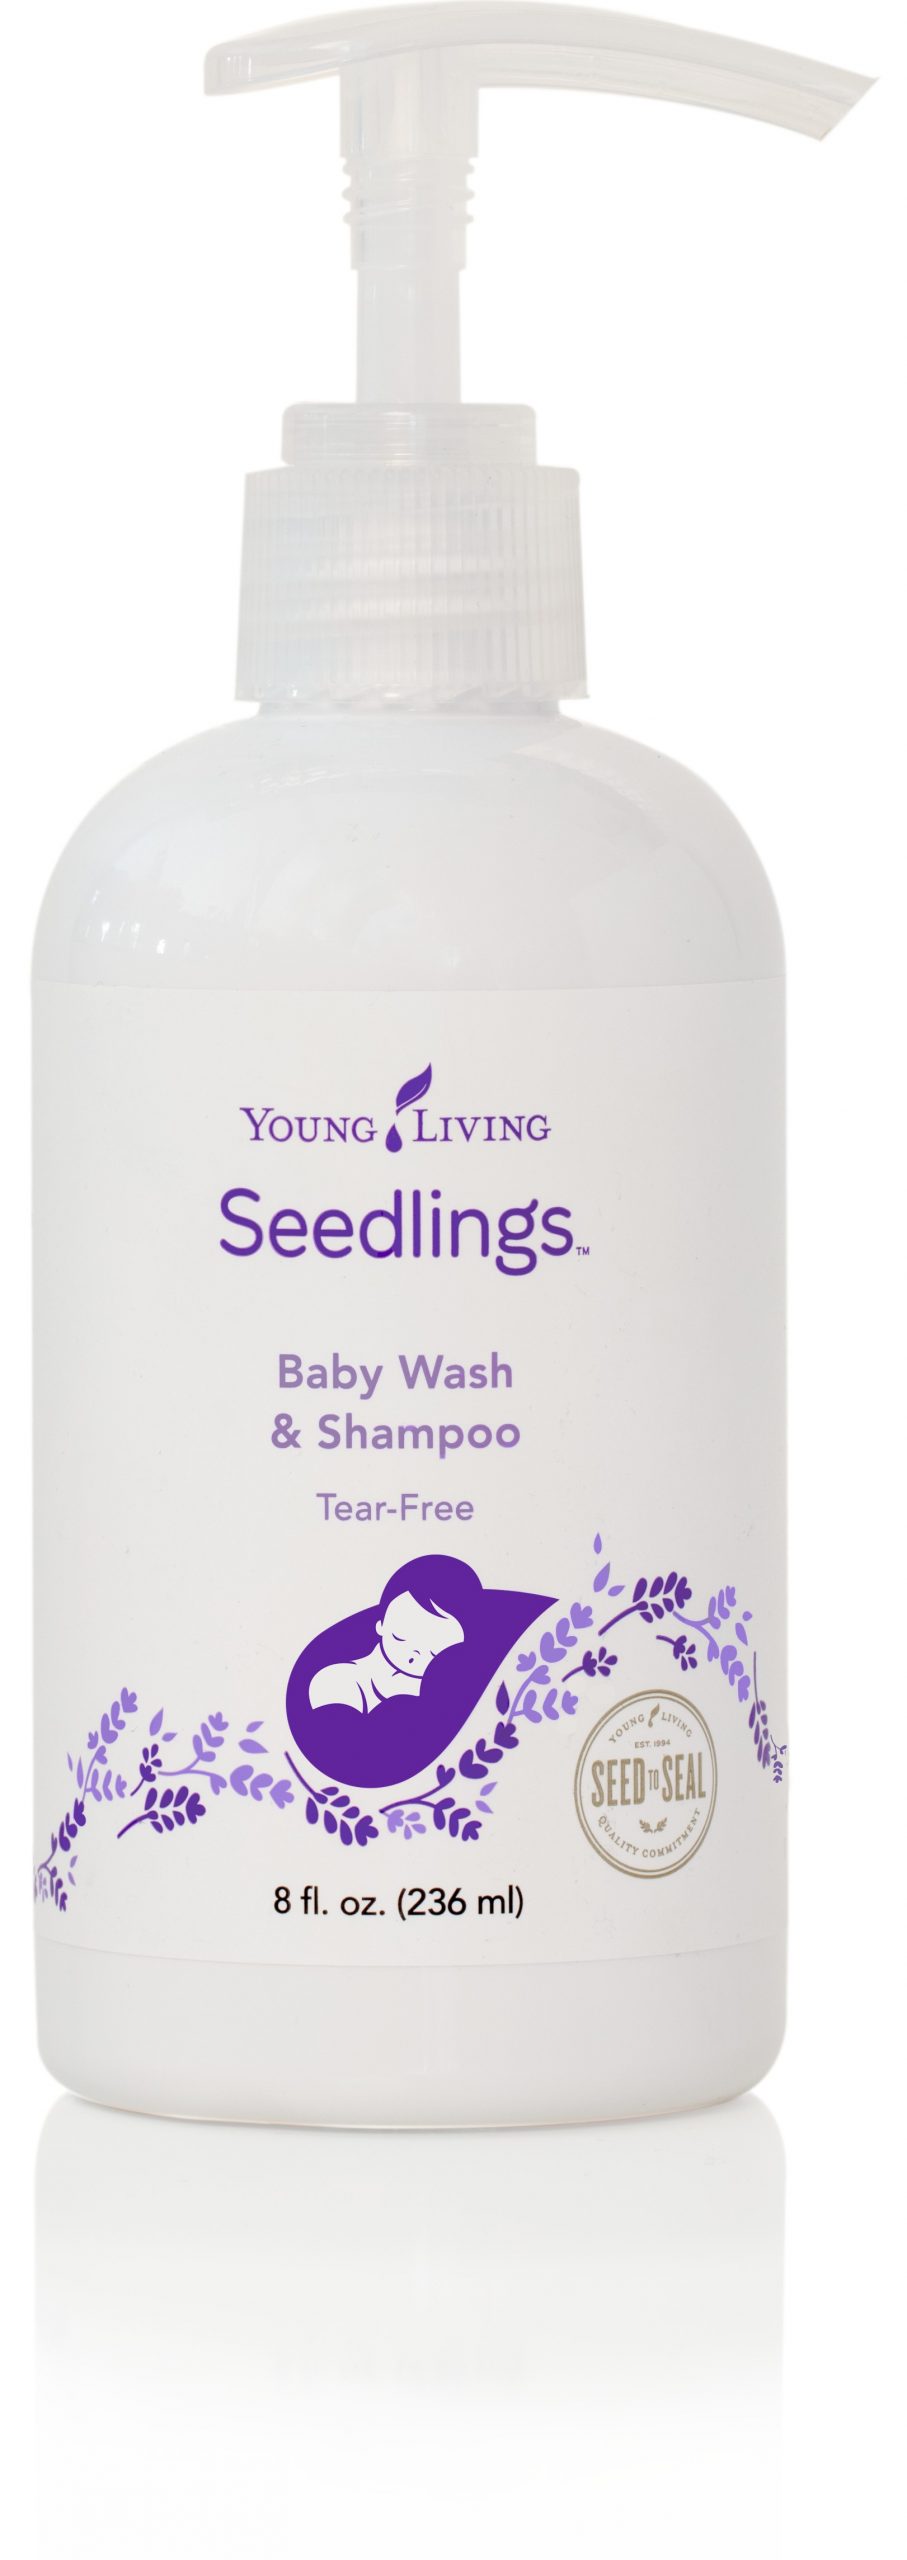 Seedlings Baby Wash & Shampoo - Young Living Essential Oils